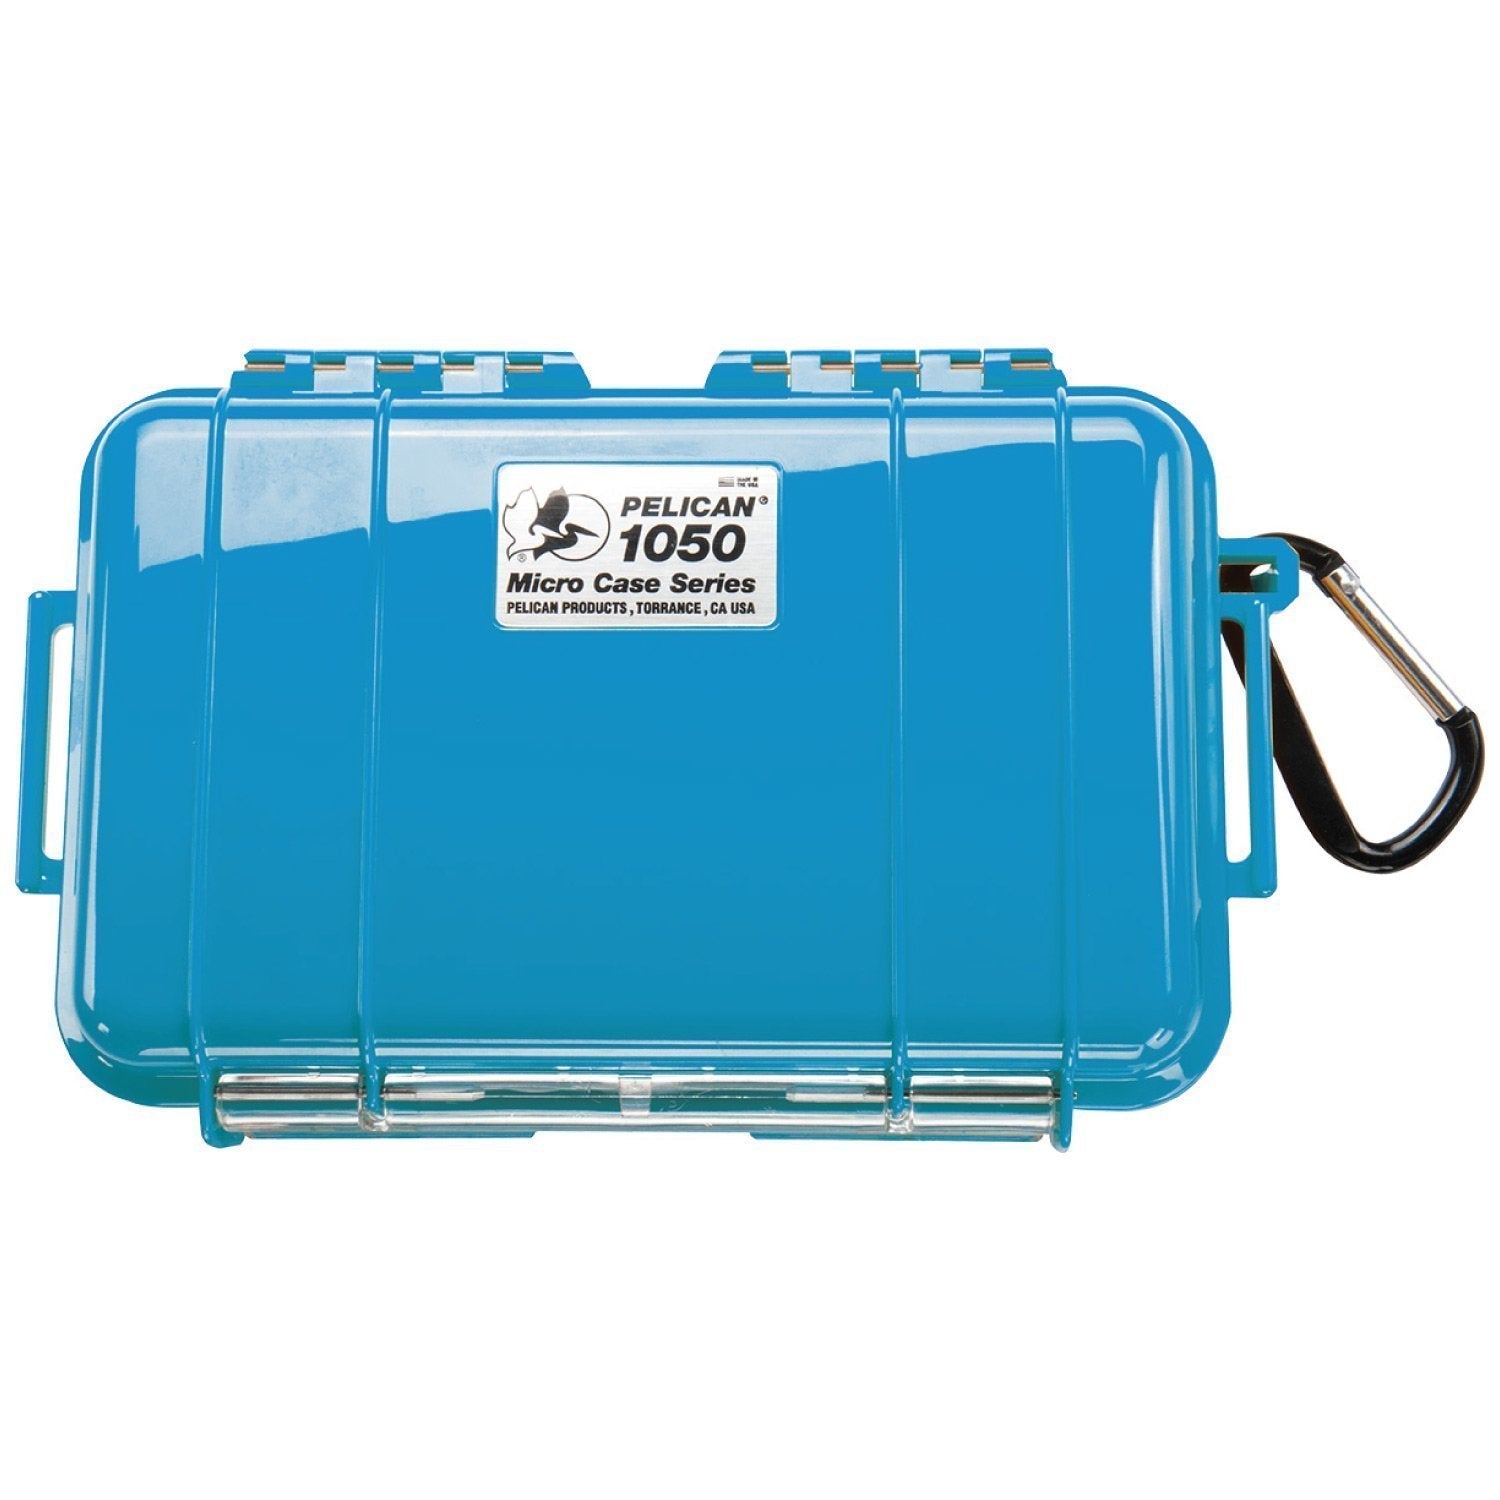 Pelican 1050 Micro Case Cases Pelican Products Blue Shell with Black Liner Tactical Gear Supplier Tactical Distributors Australia